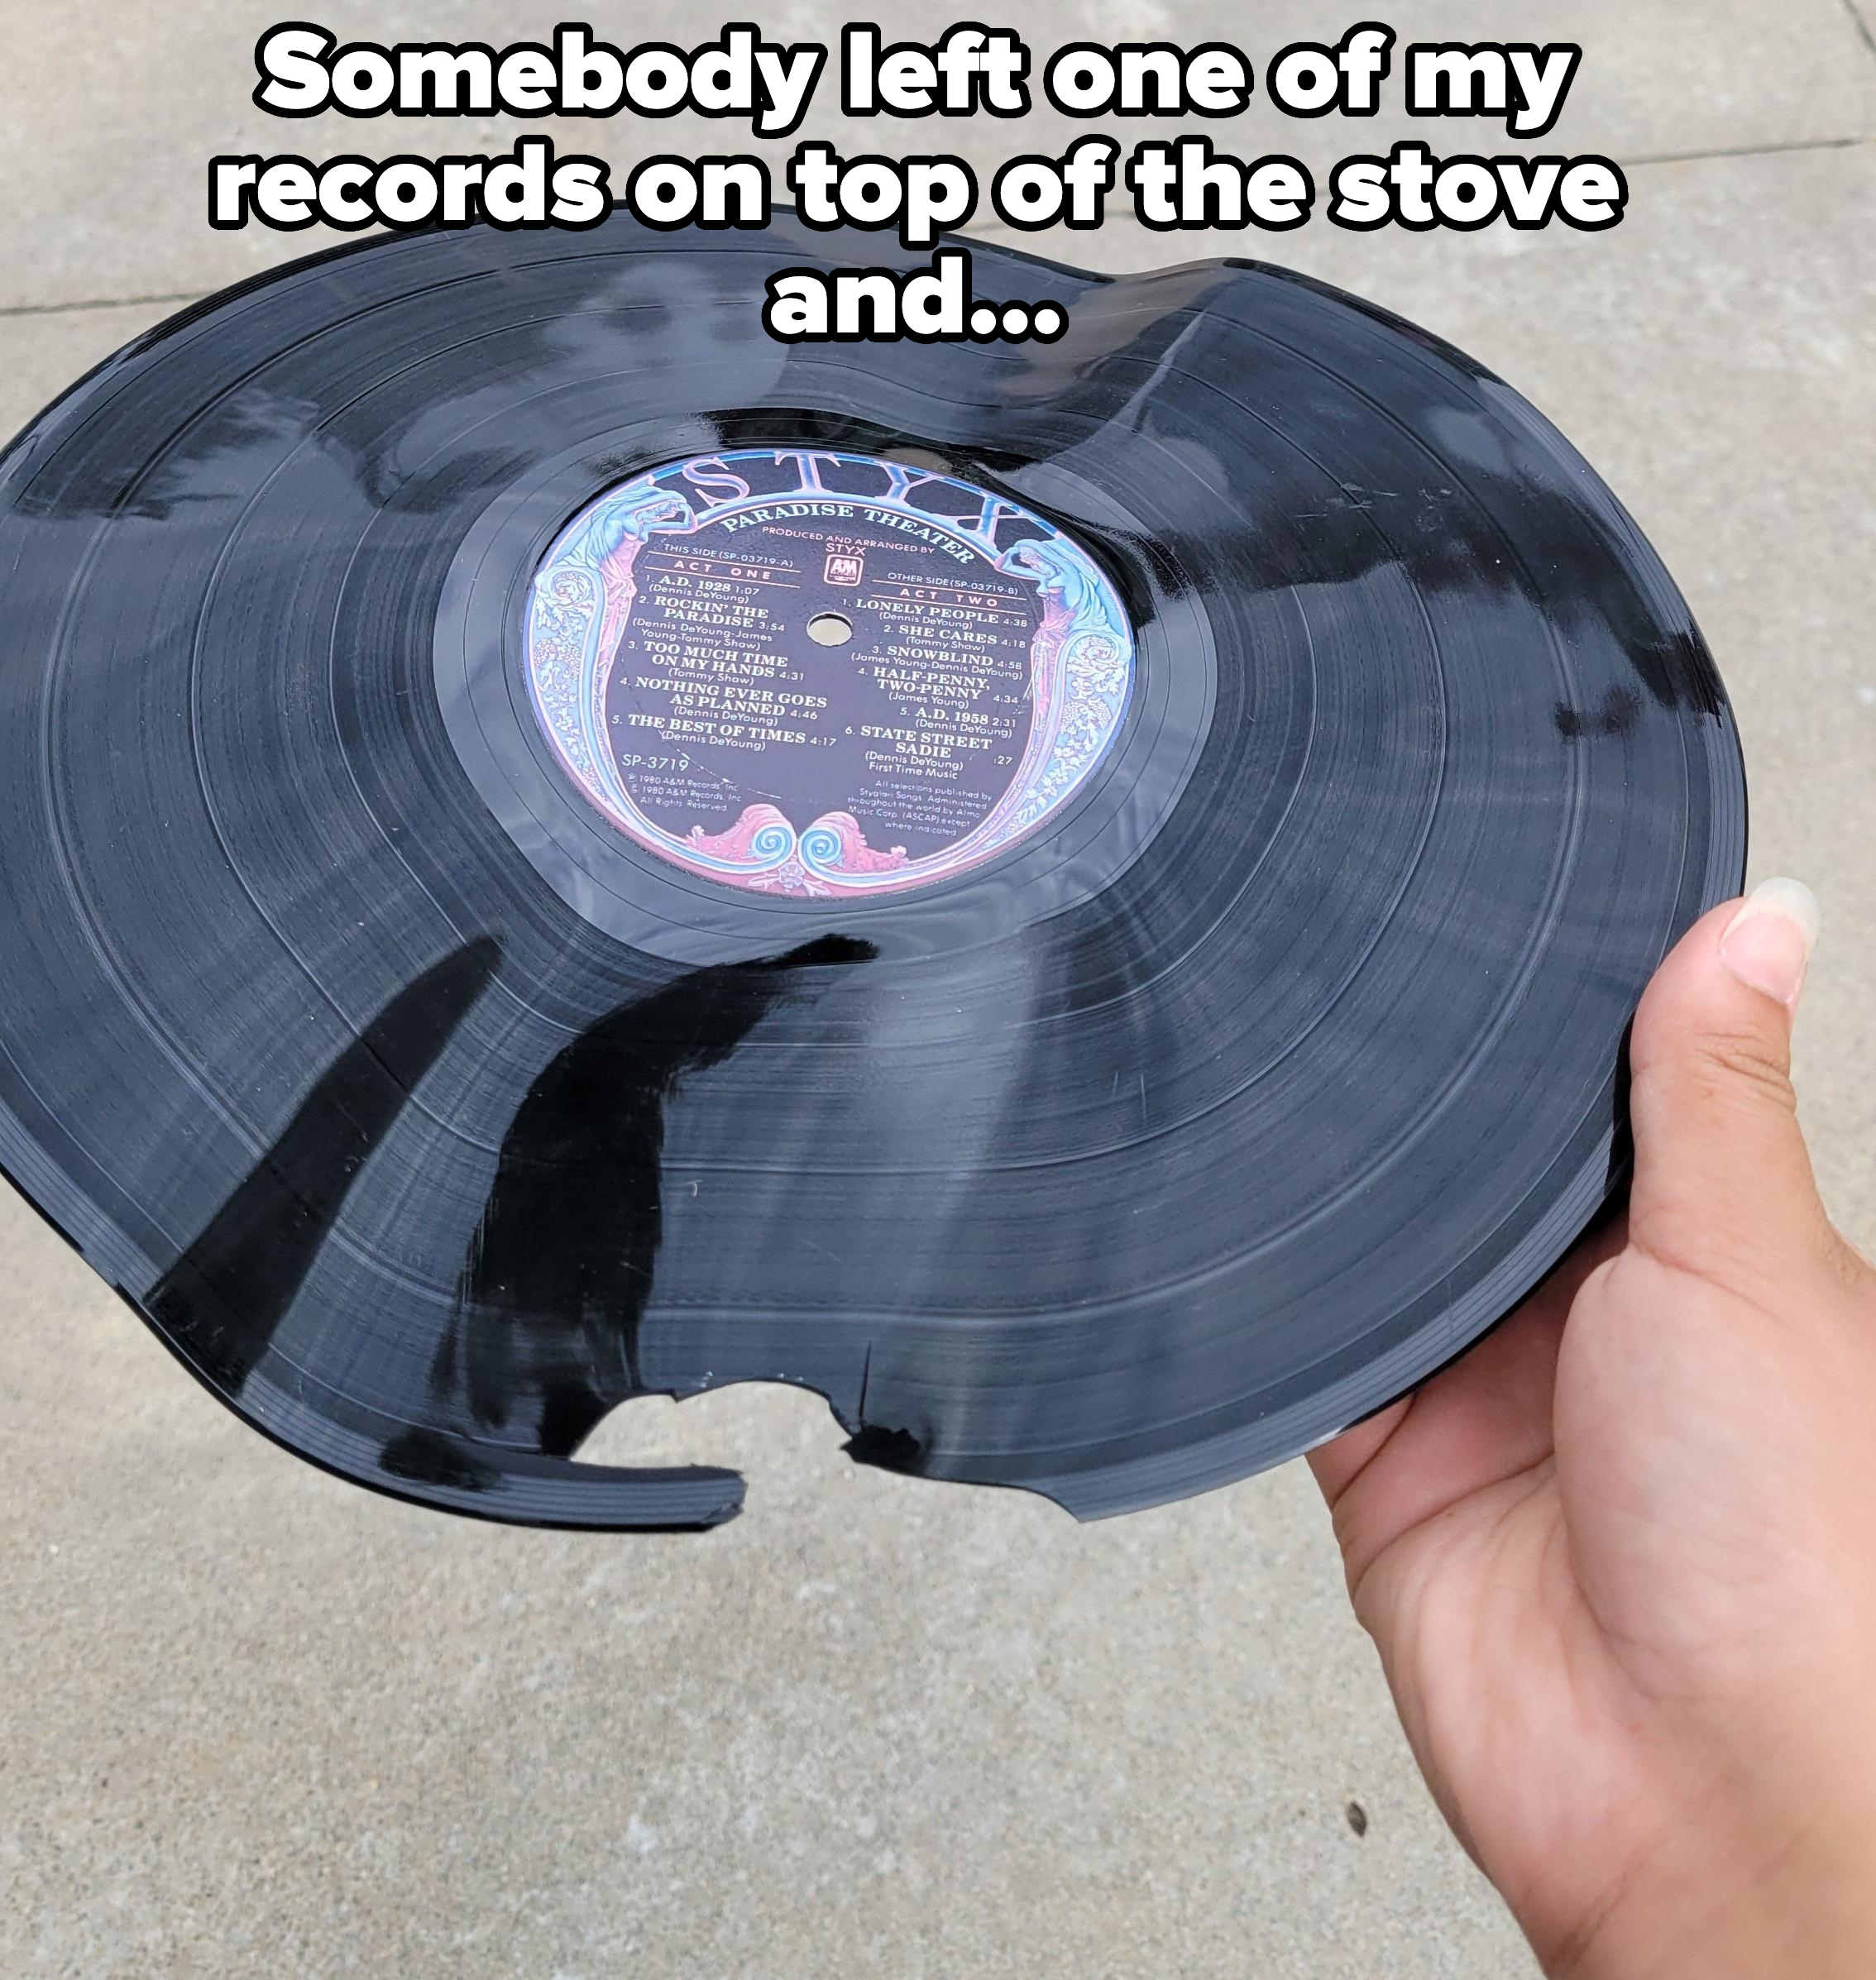 A hand holding a damaged, partially melted LP record that was left on a stove